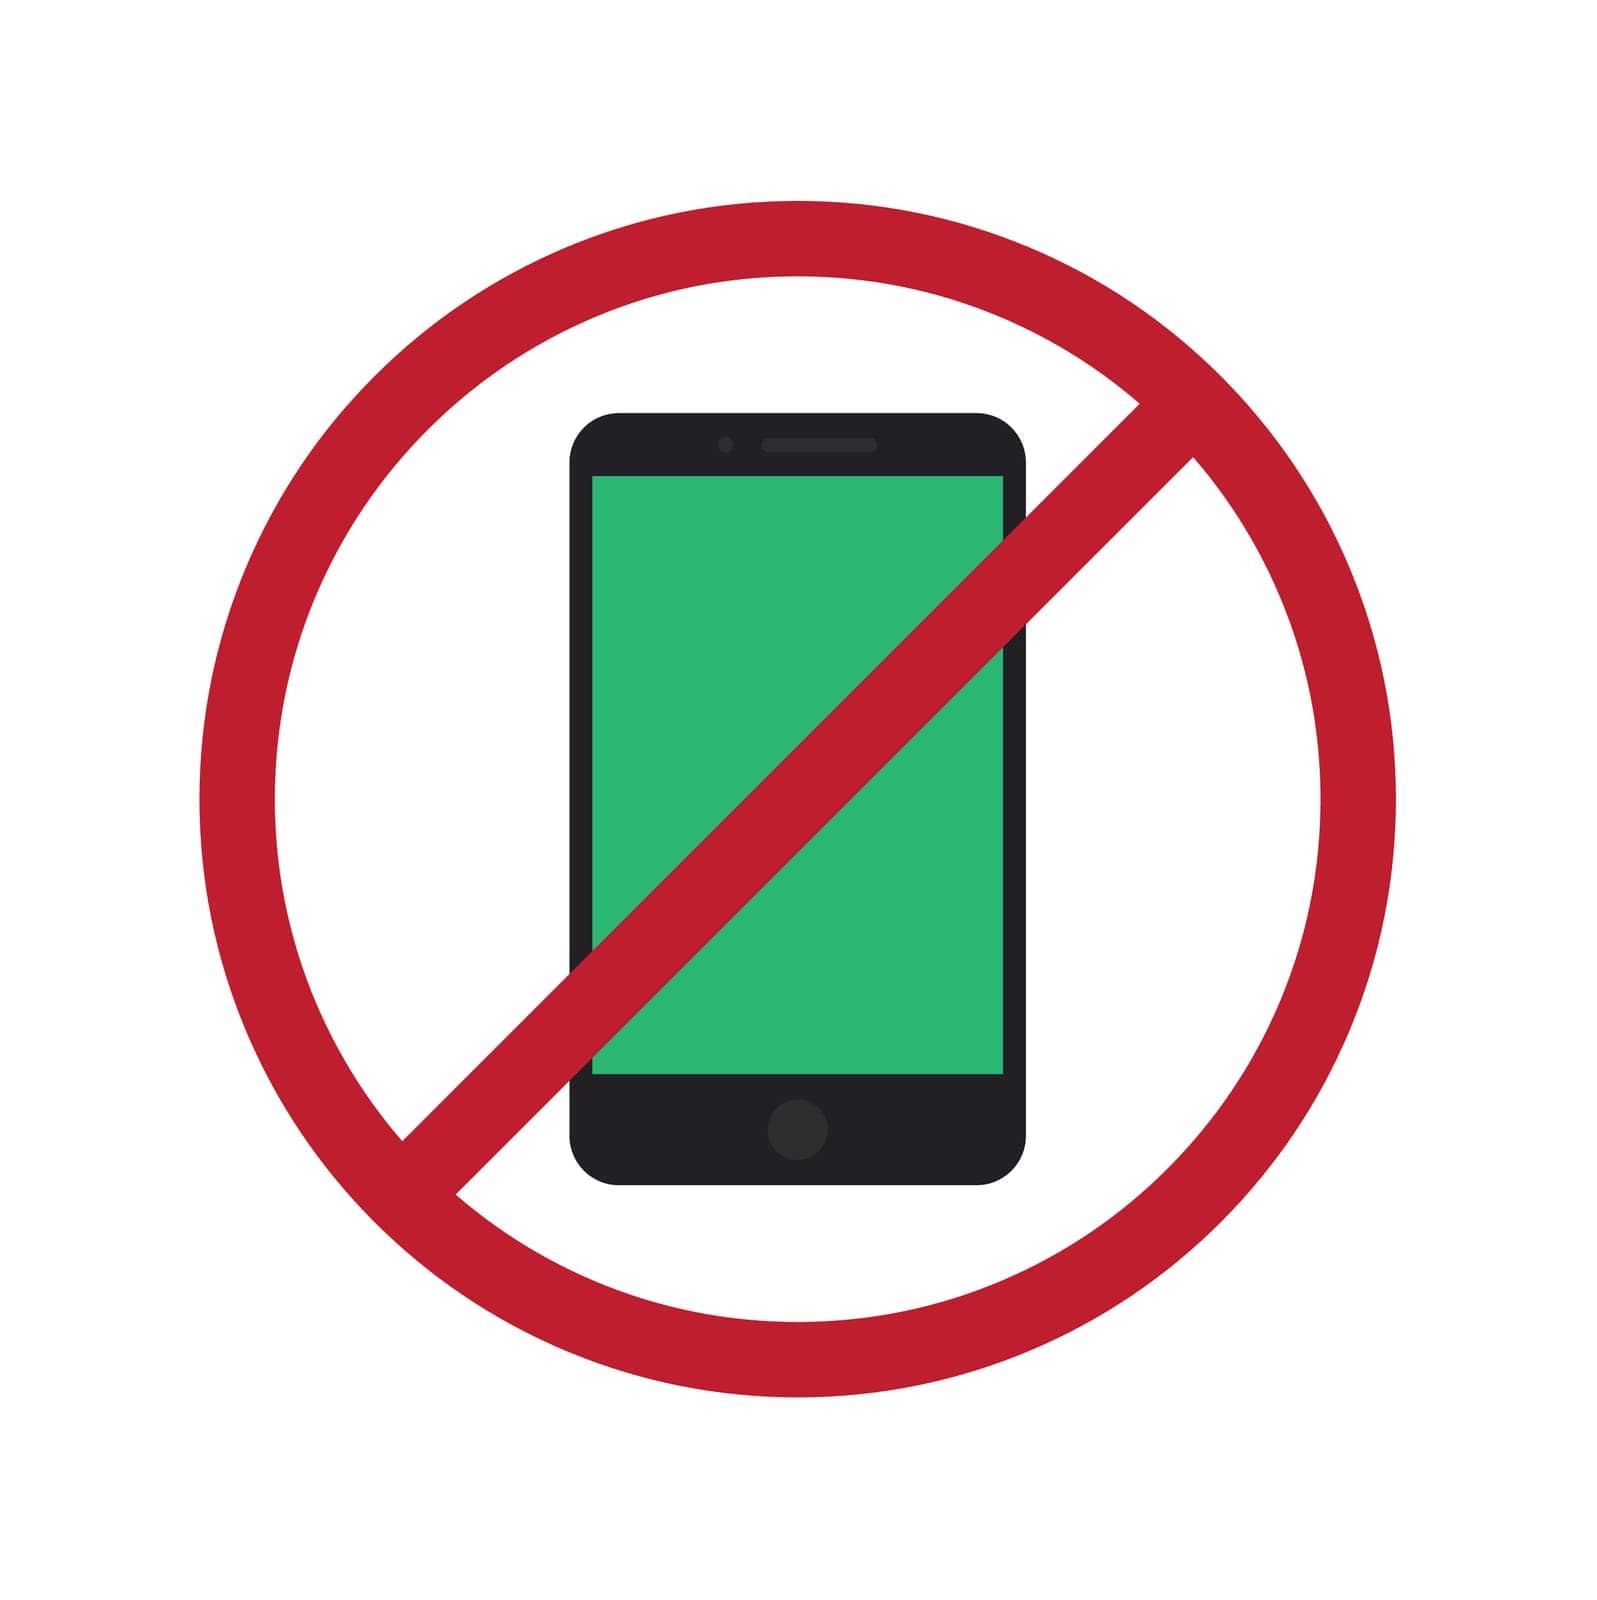 Phone Not Allowed icon vector image. Suitable for mobile application web application and print media.